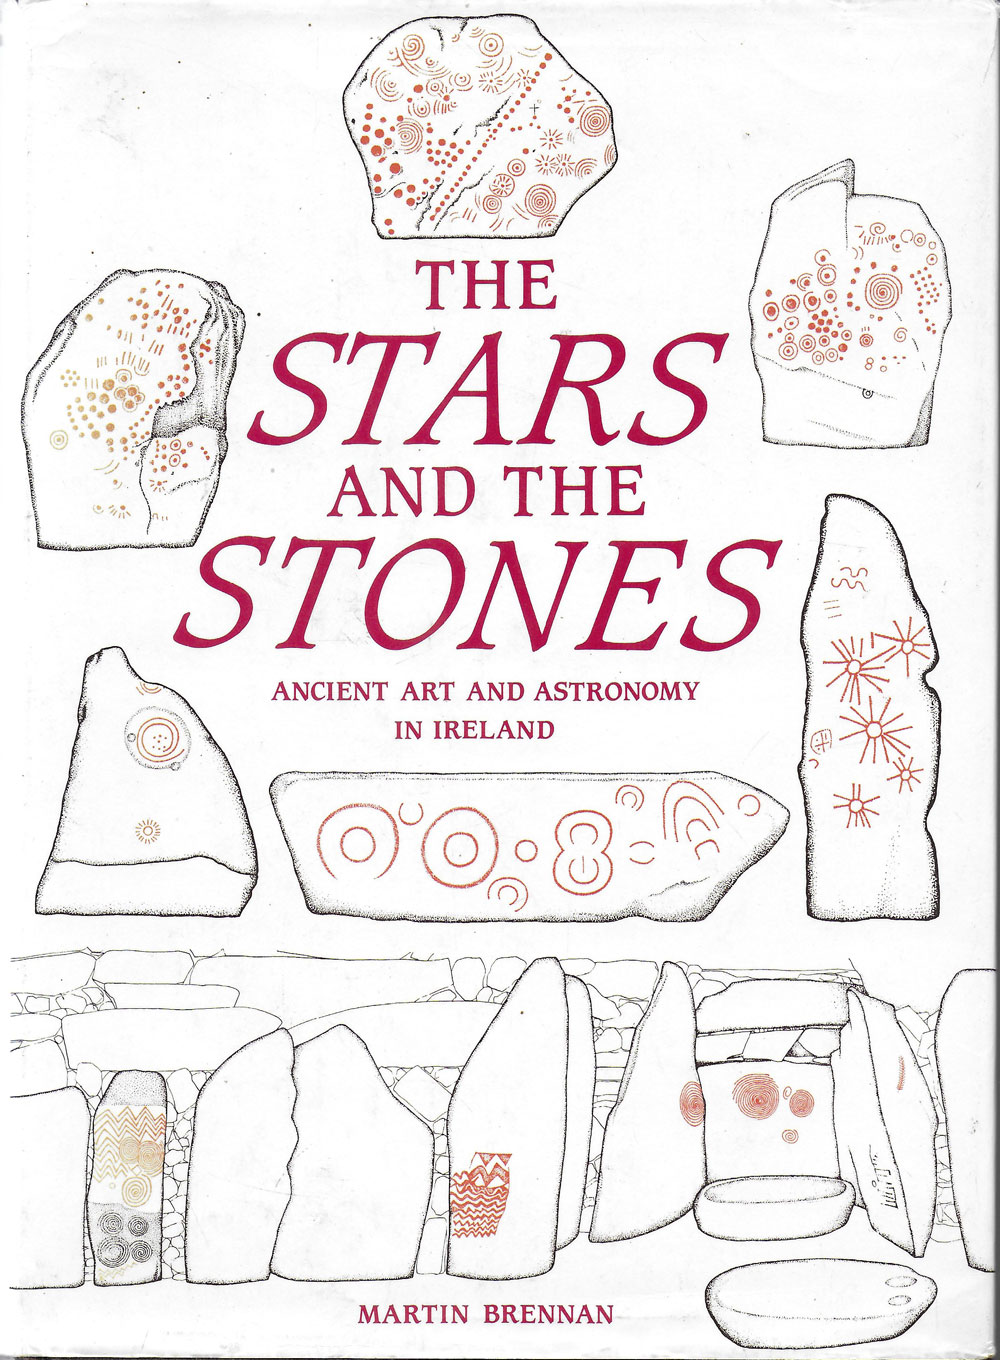 The Stars and the Stones published by Martin Brennan in 1983.